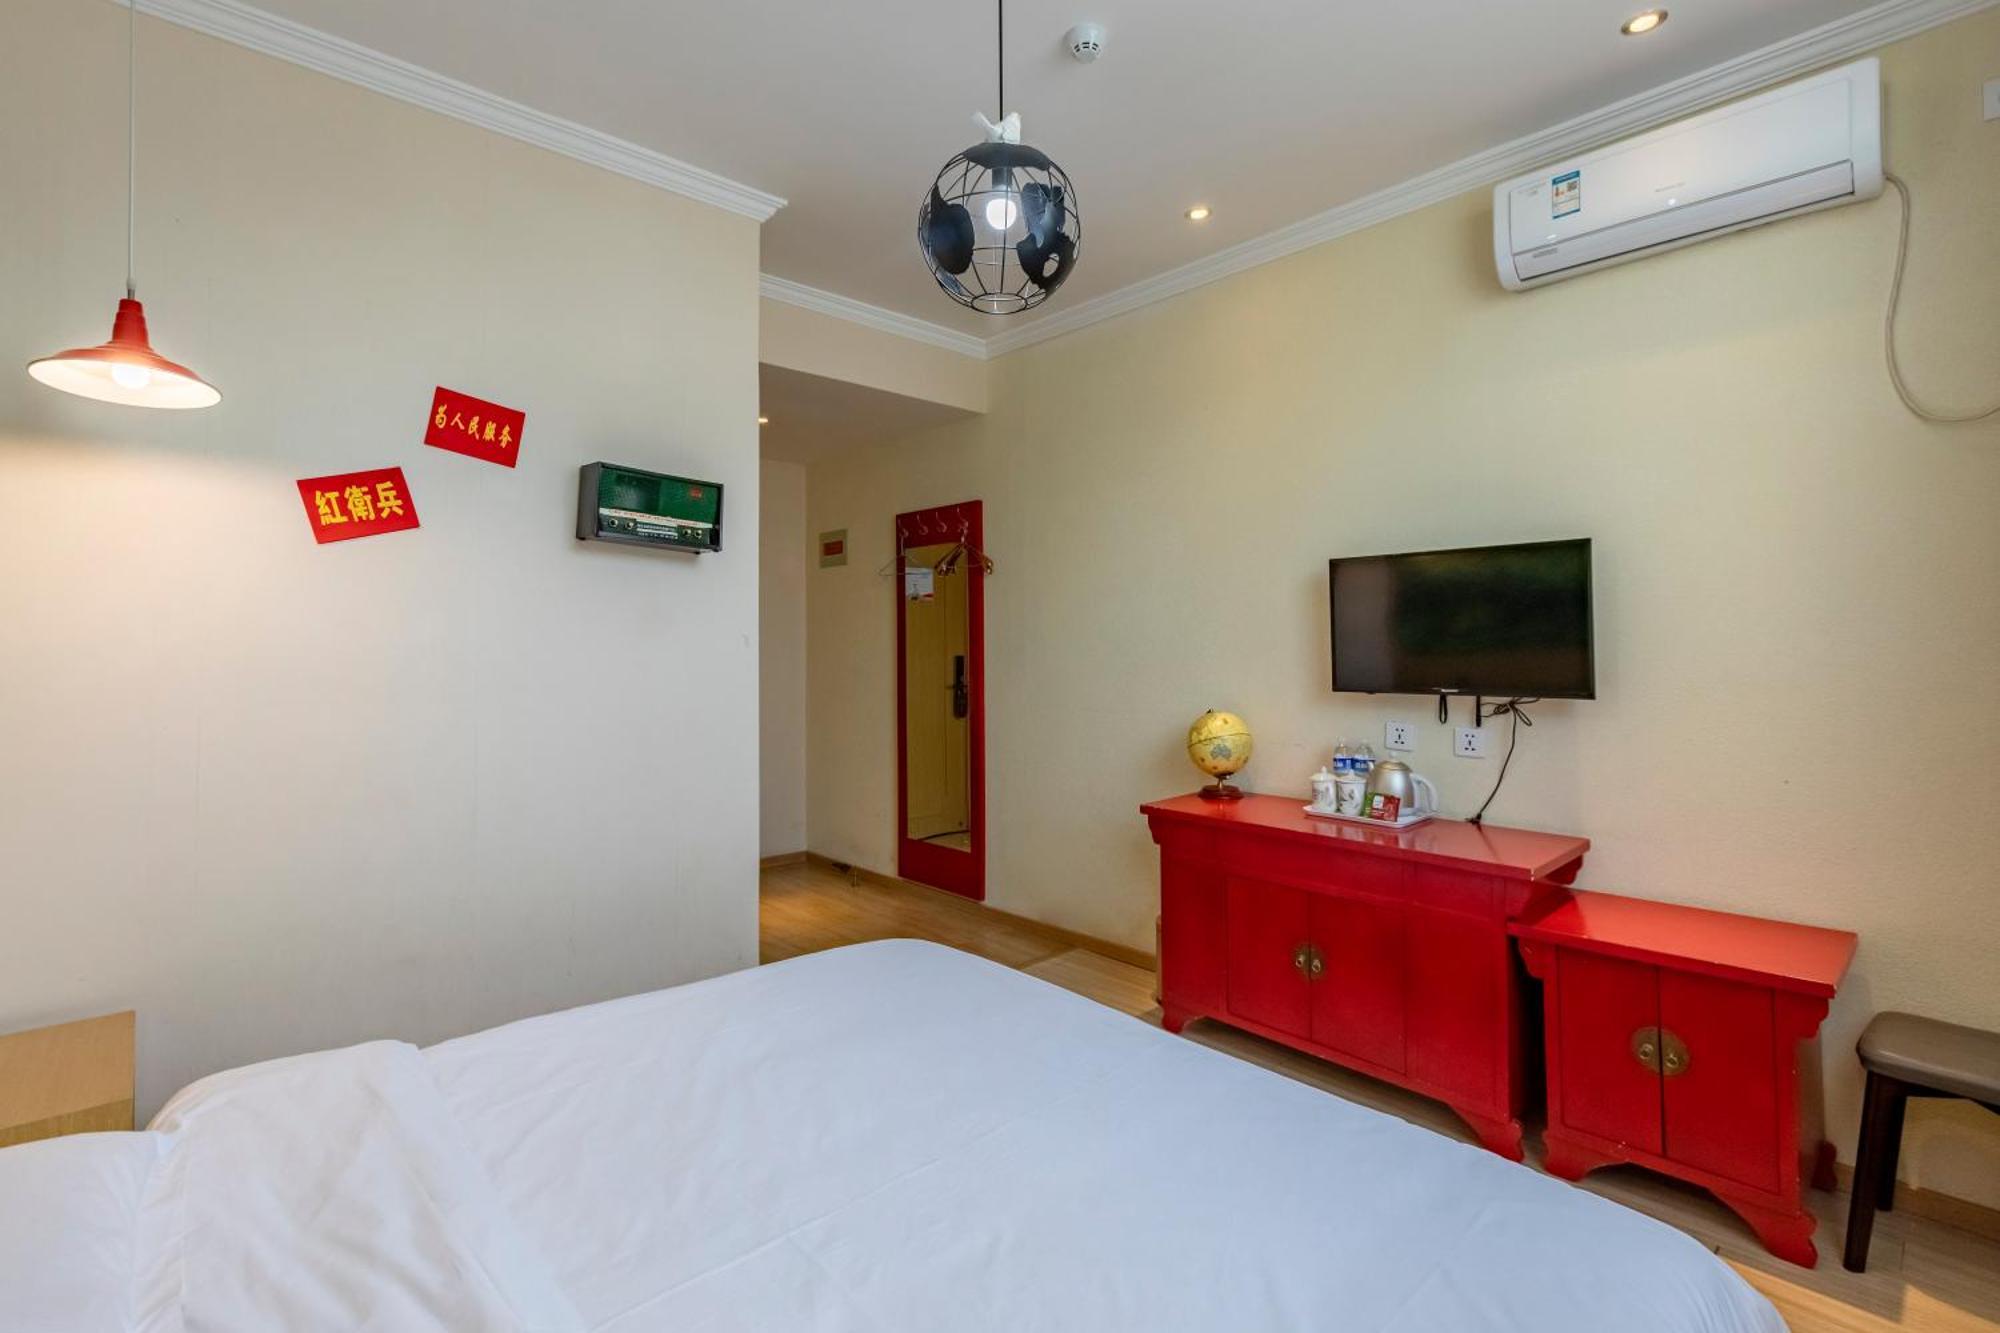 Happy Dragon Alley Hotel-In The City Center With Big Window&Free Coffe, Fluent English Speaking,Tourist Attractions Ticket Service&Food Recommendation,Near Tian Anmen Forbiddencity,Near Lama Temple,Easy To Walk To Nanluoalley&Shichahai Beijing Bagian luar foto